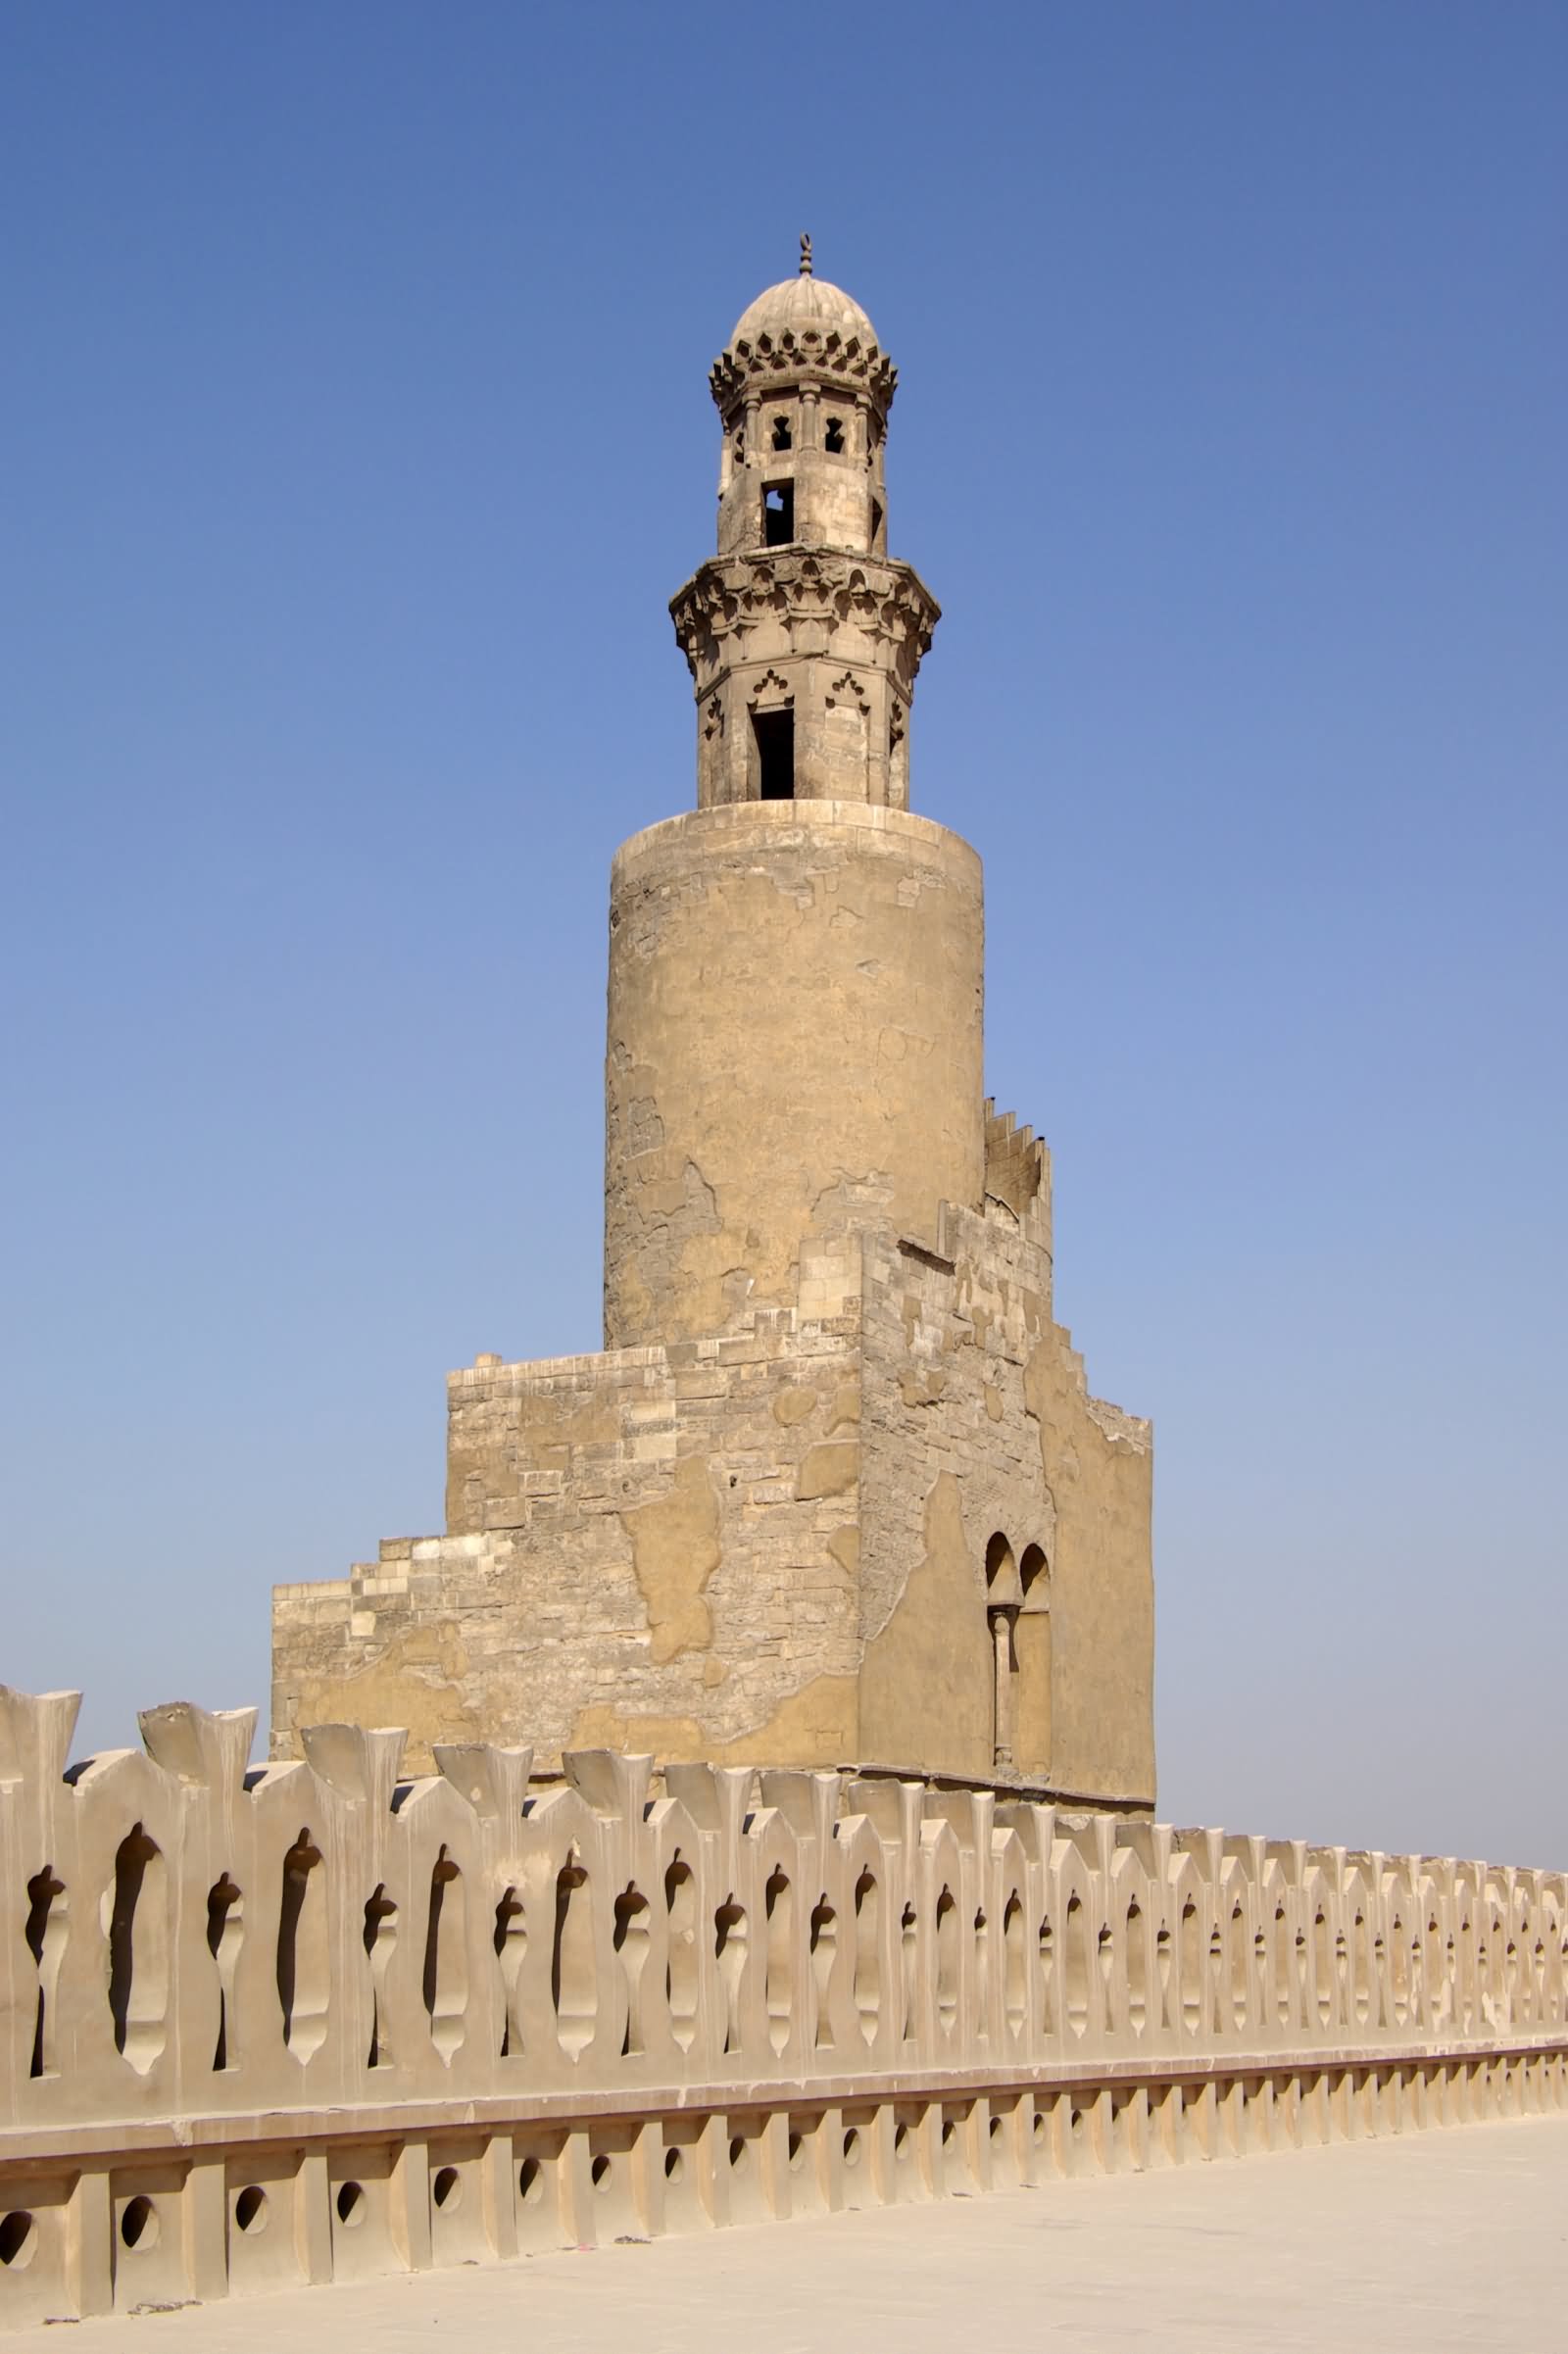 The Spiral Minaret Of Ibn Tulun Mosque